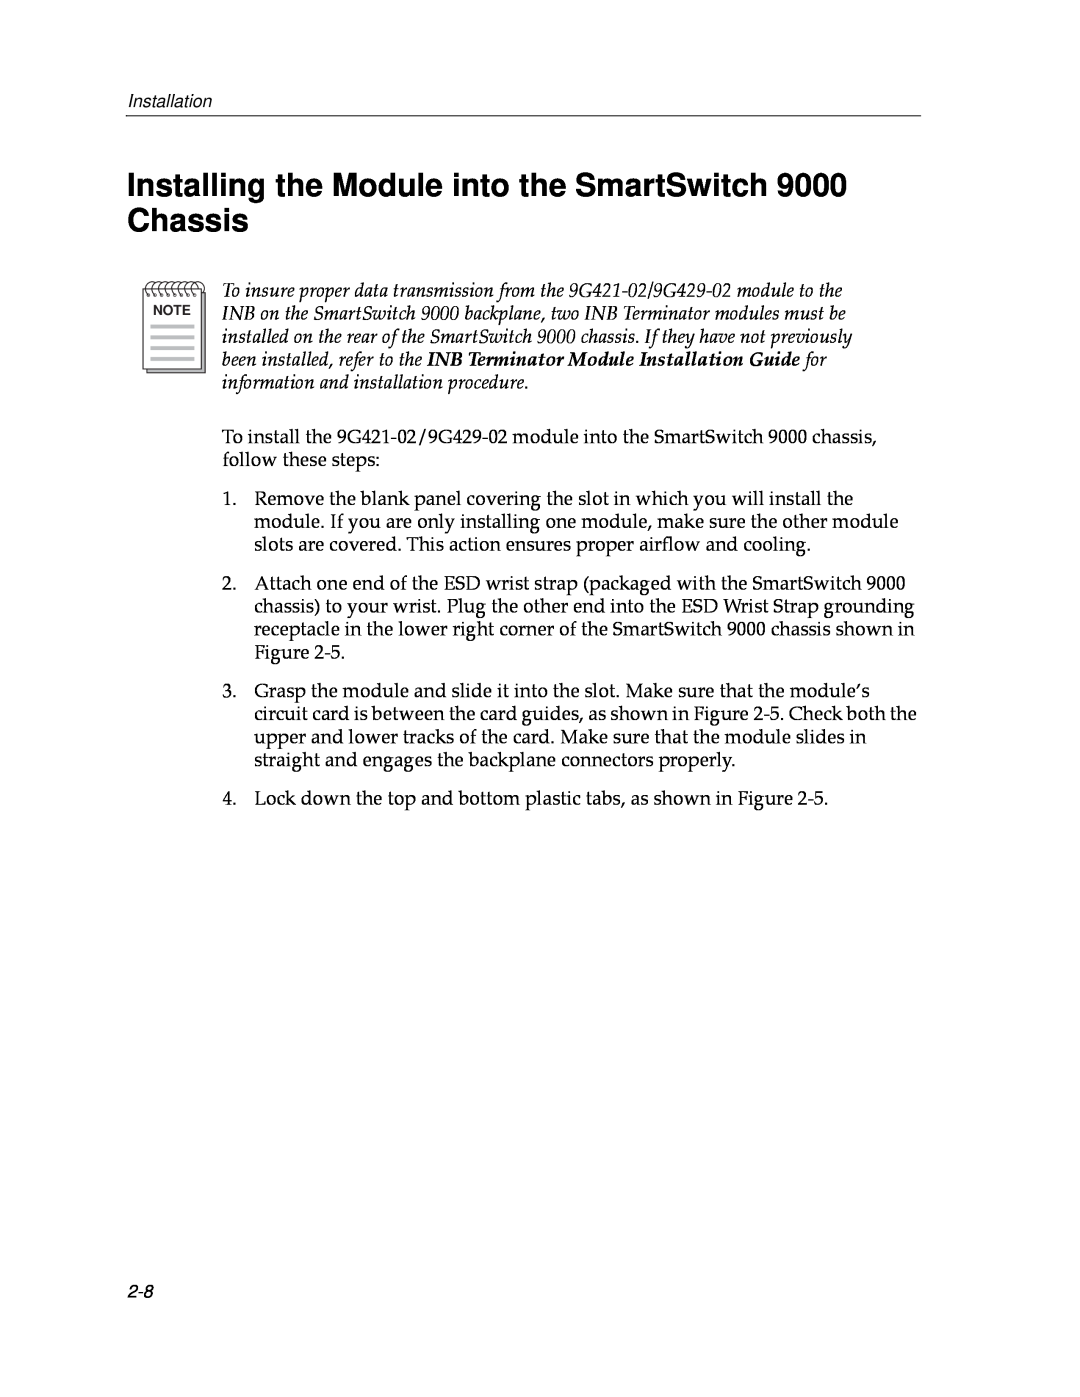 Cabletron Systems manual Installing the Module into the SmartSwitch 9000 Chassis 